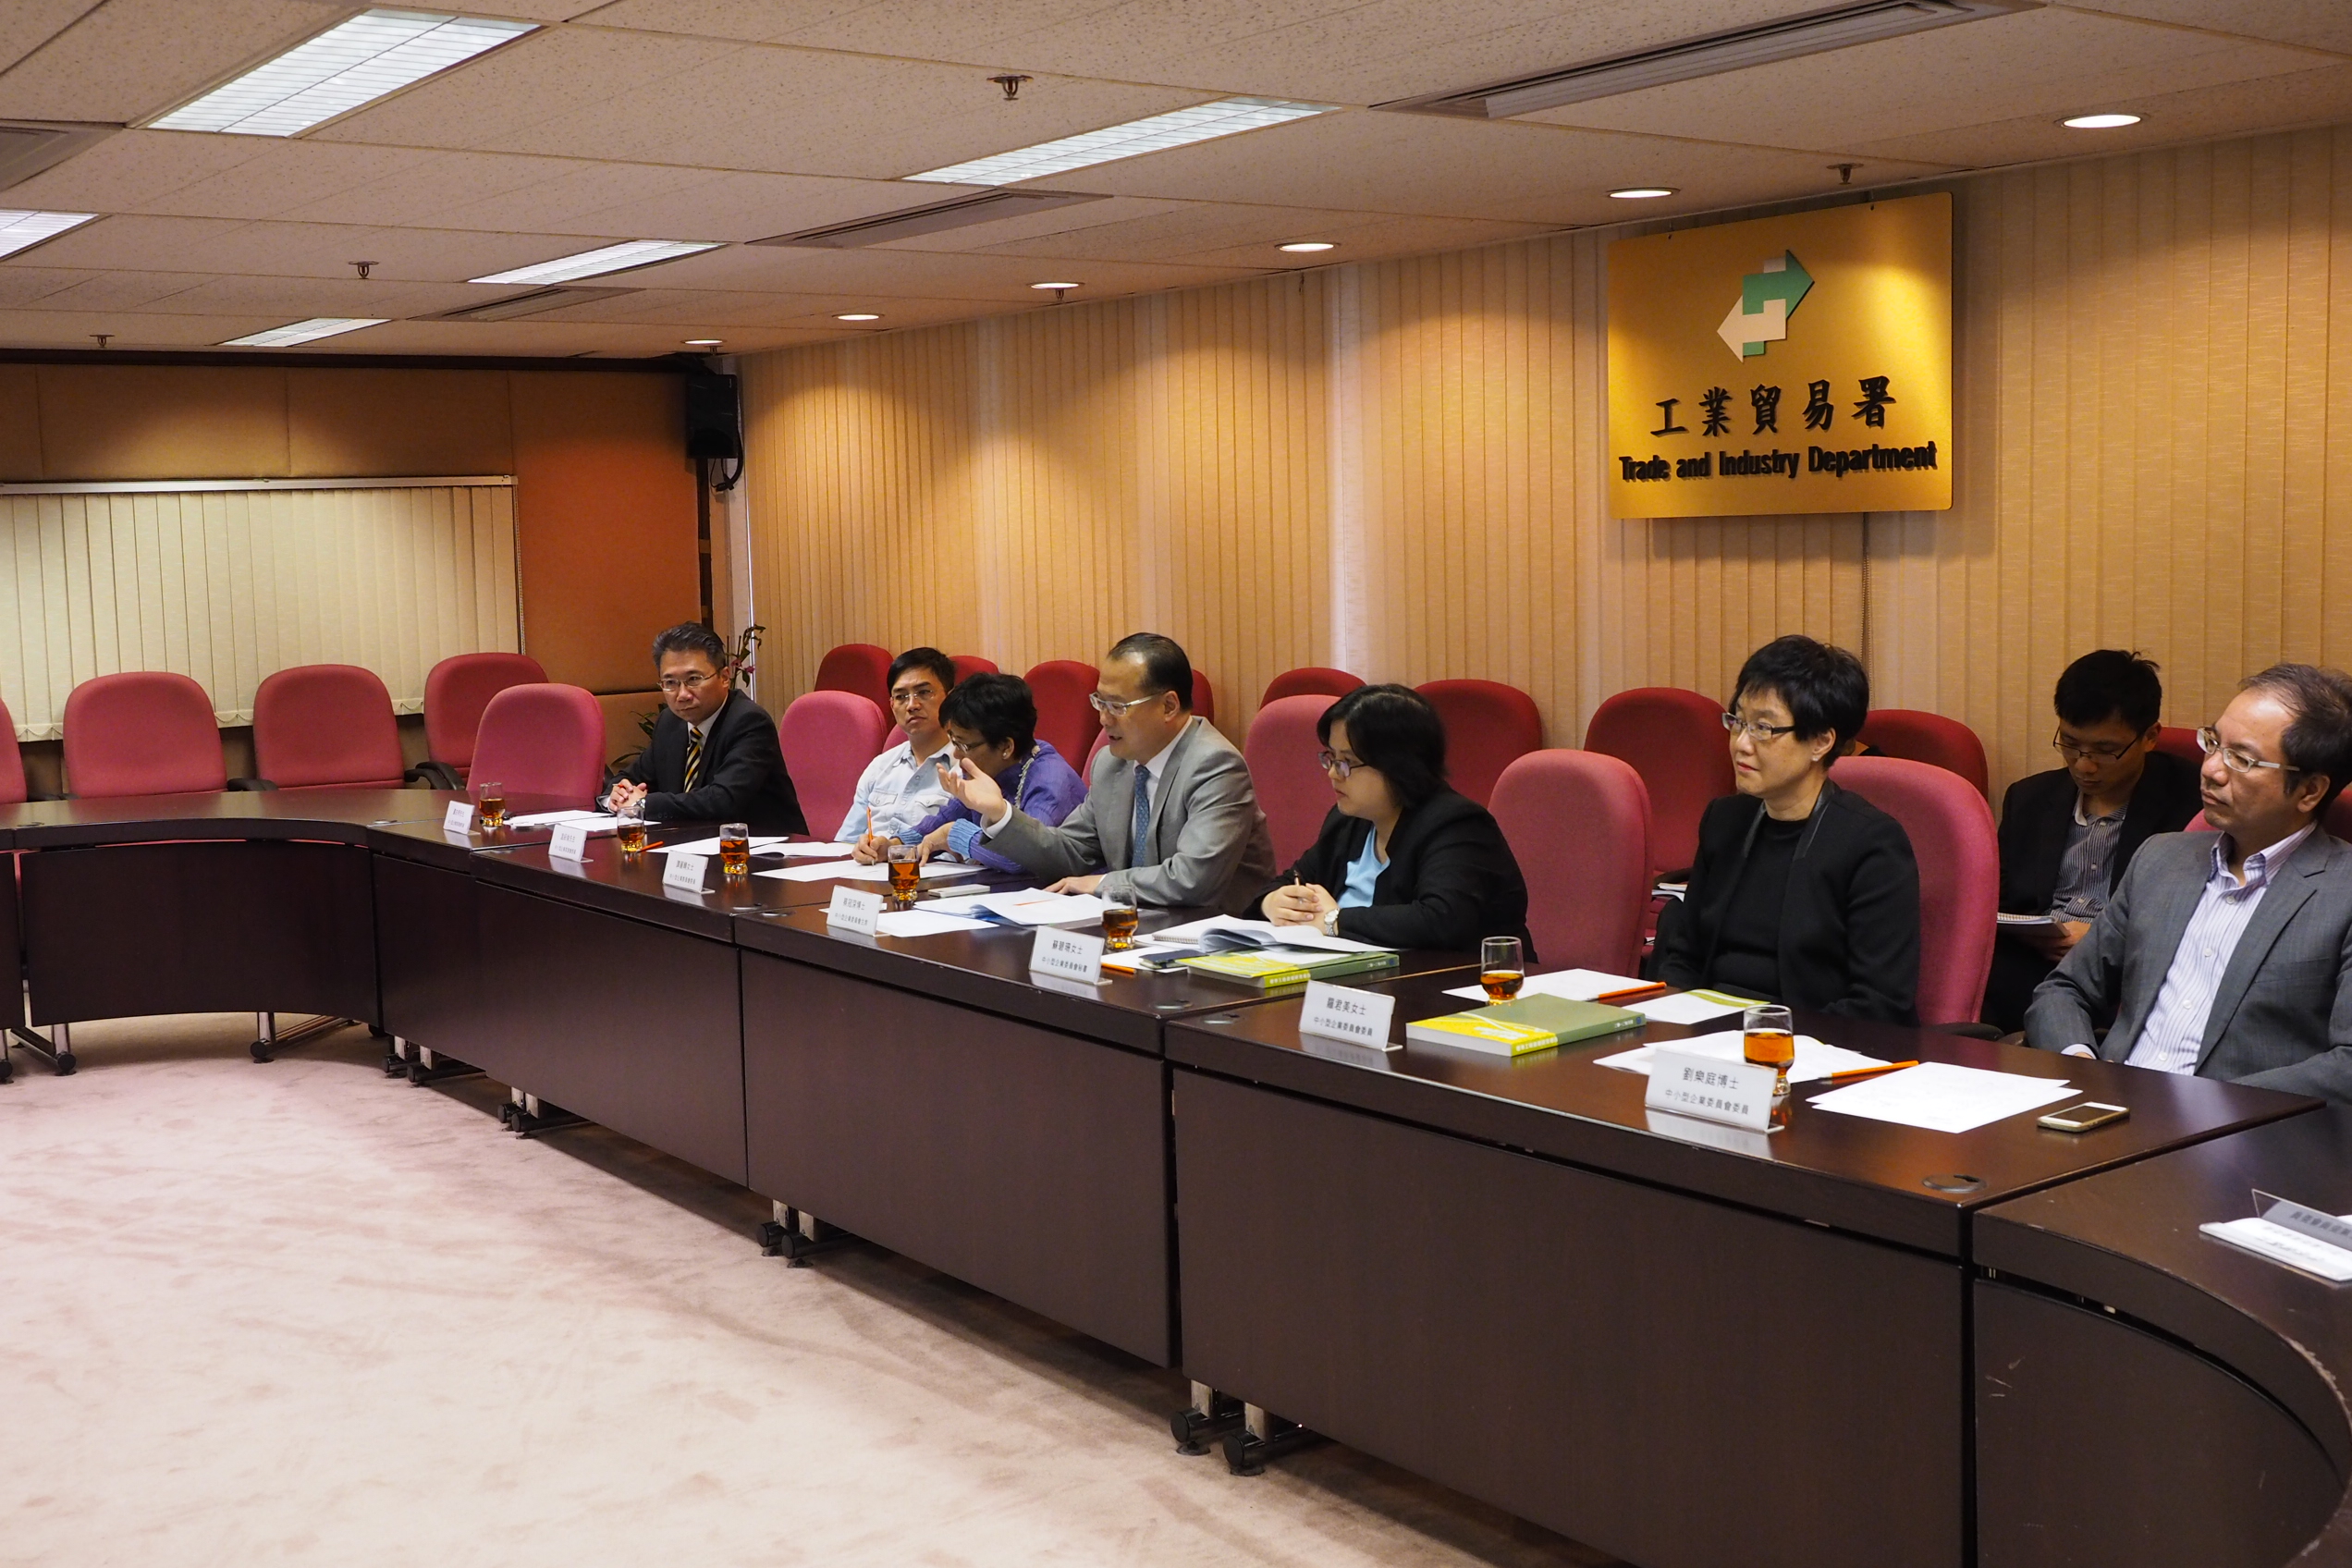 Photo 2: The Small and Medium Enterprises Committee met with local SME organisations on 2 May 2014 to exchange views on standard working hours. A written summary (Chinese only) reflecting the views of local SMEs on standard working hours was then passed to the Standard Working Hours Committee for reference.